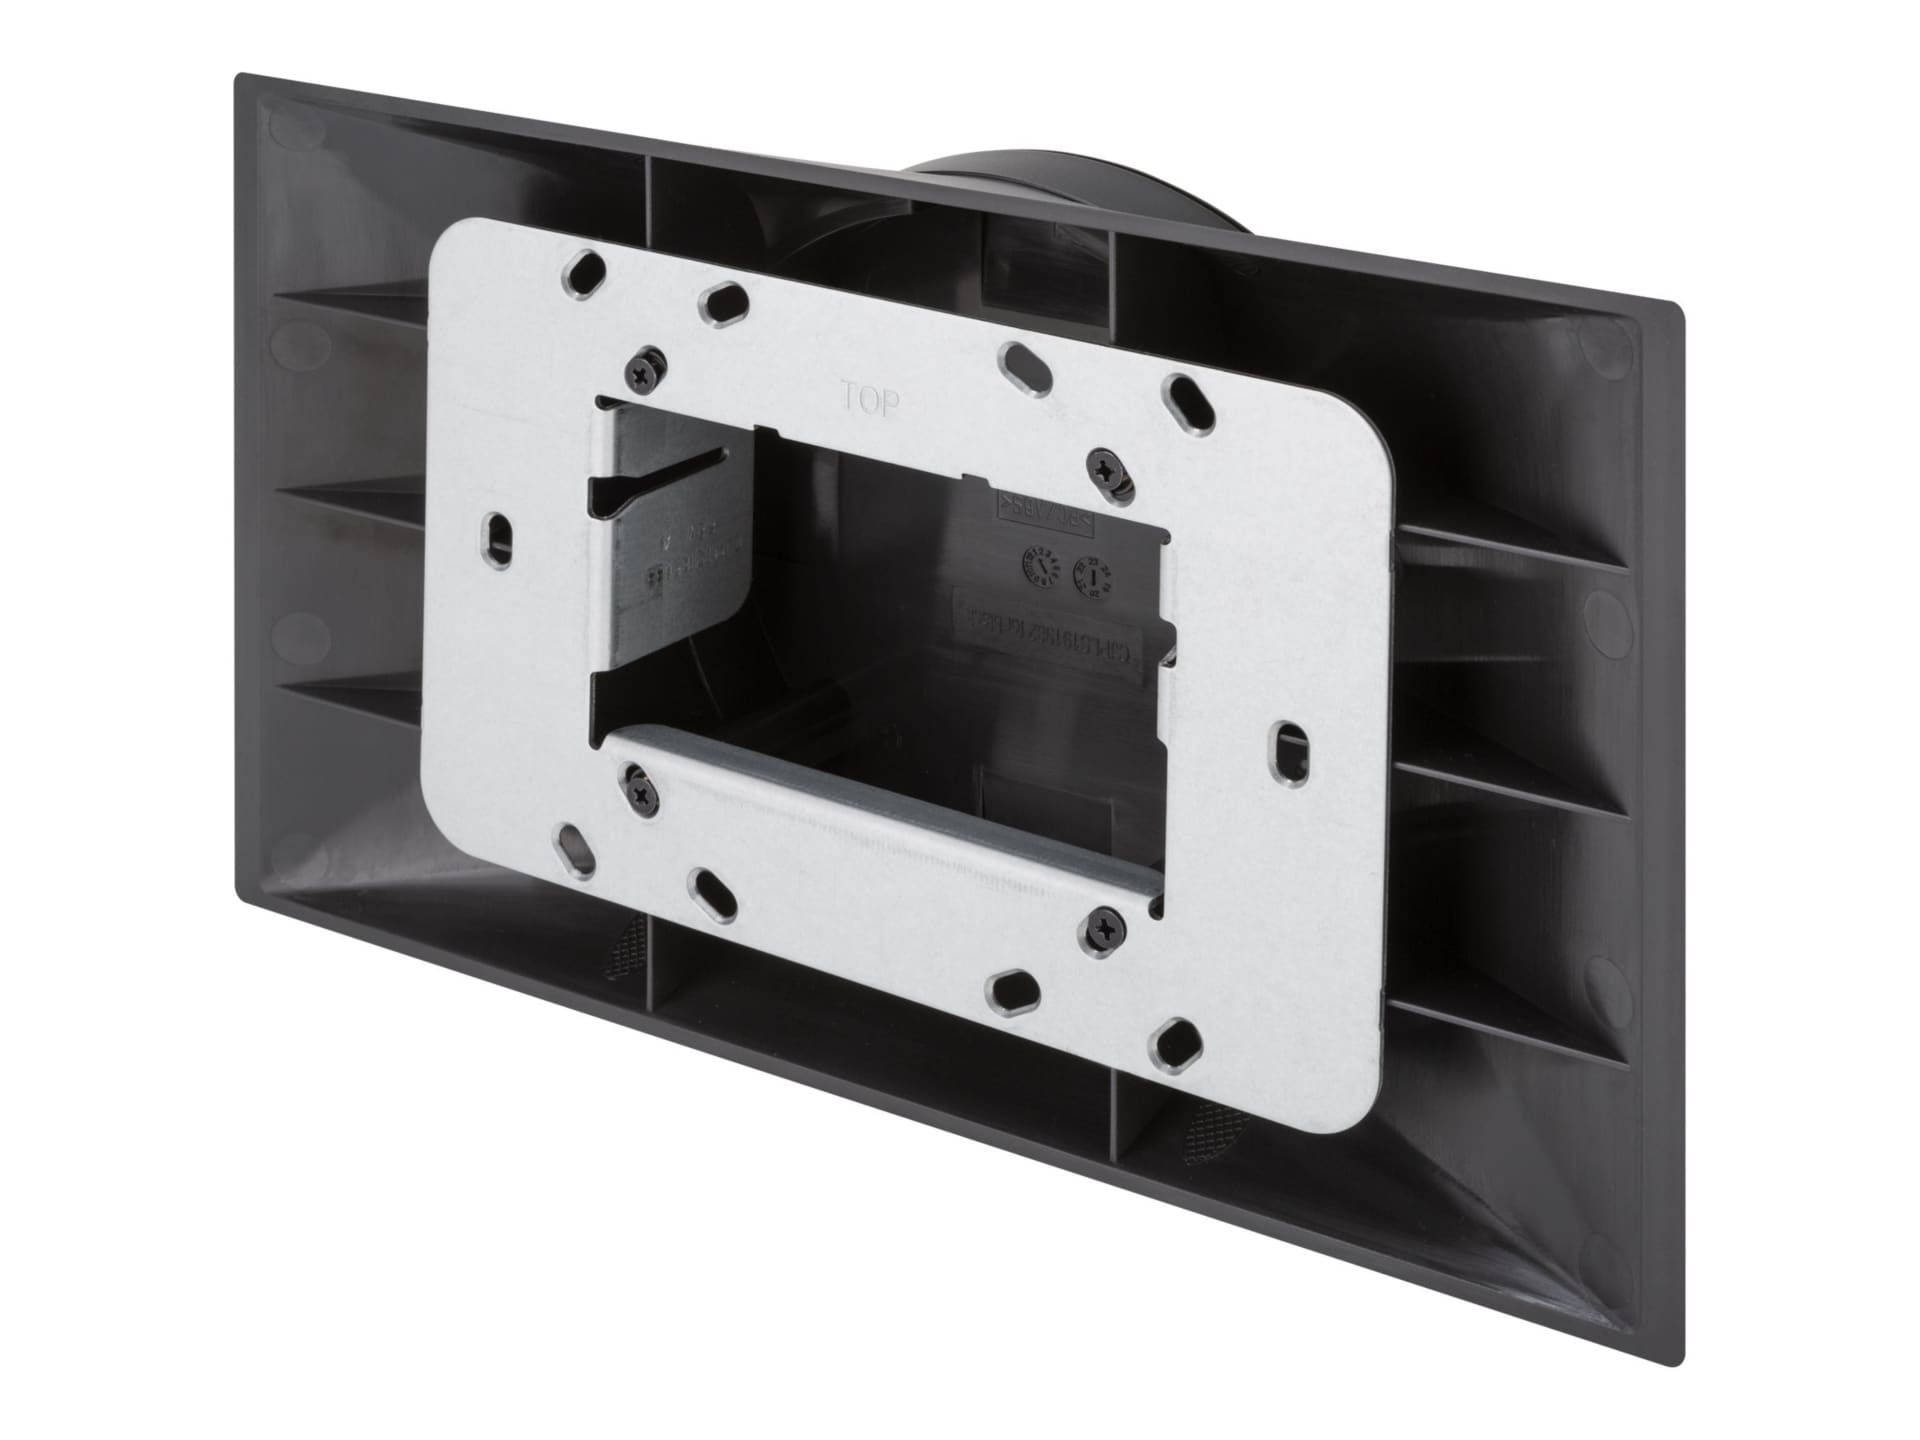 Crestron mounting kit - multisurface - for touchscreen - smooth black